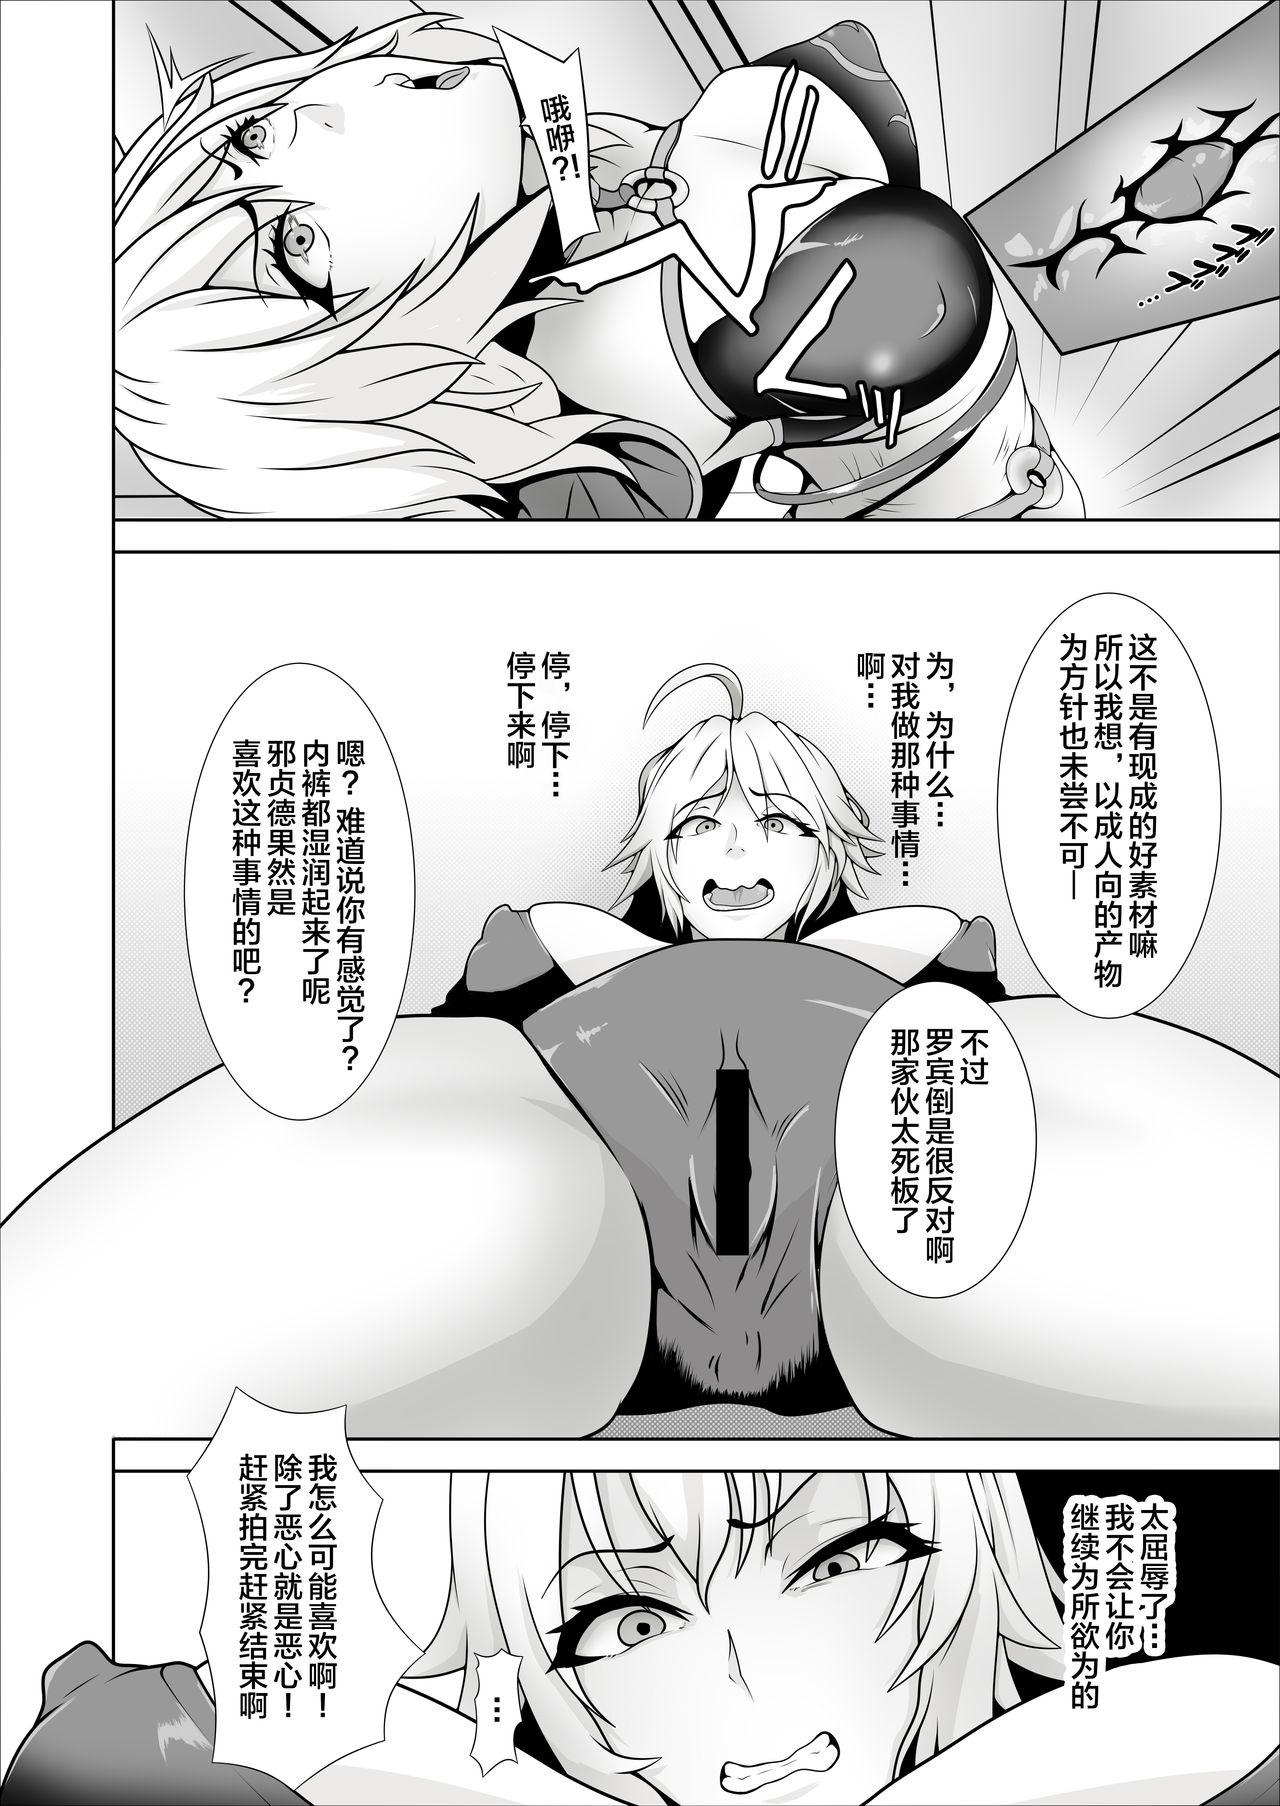 Ballbusting 俺のジャンヌは性処理係 - Fate grand order Lesbian - Page 12